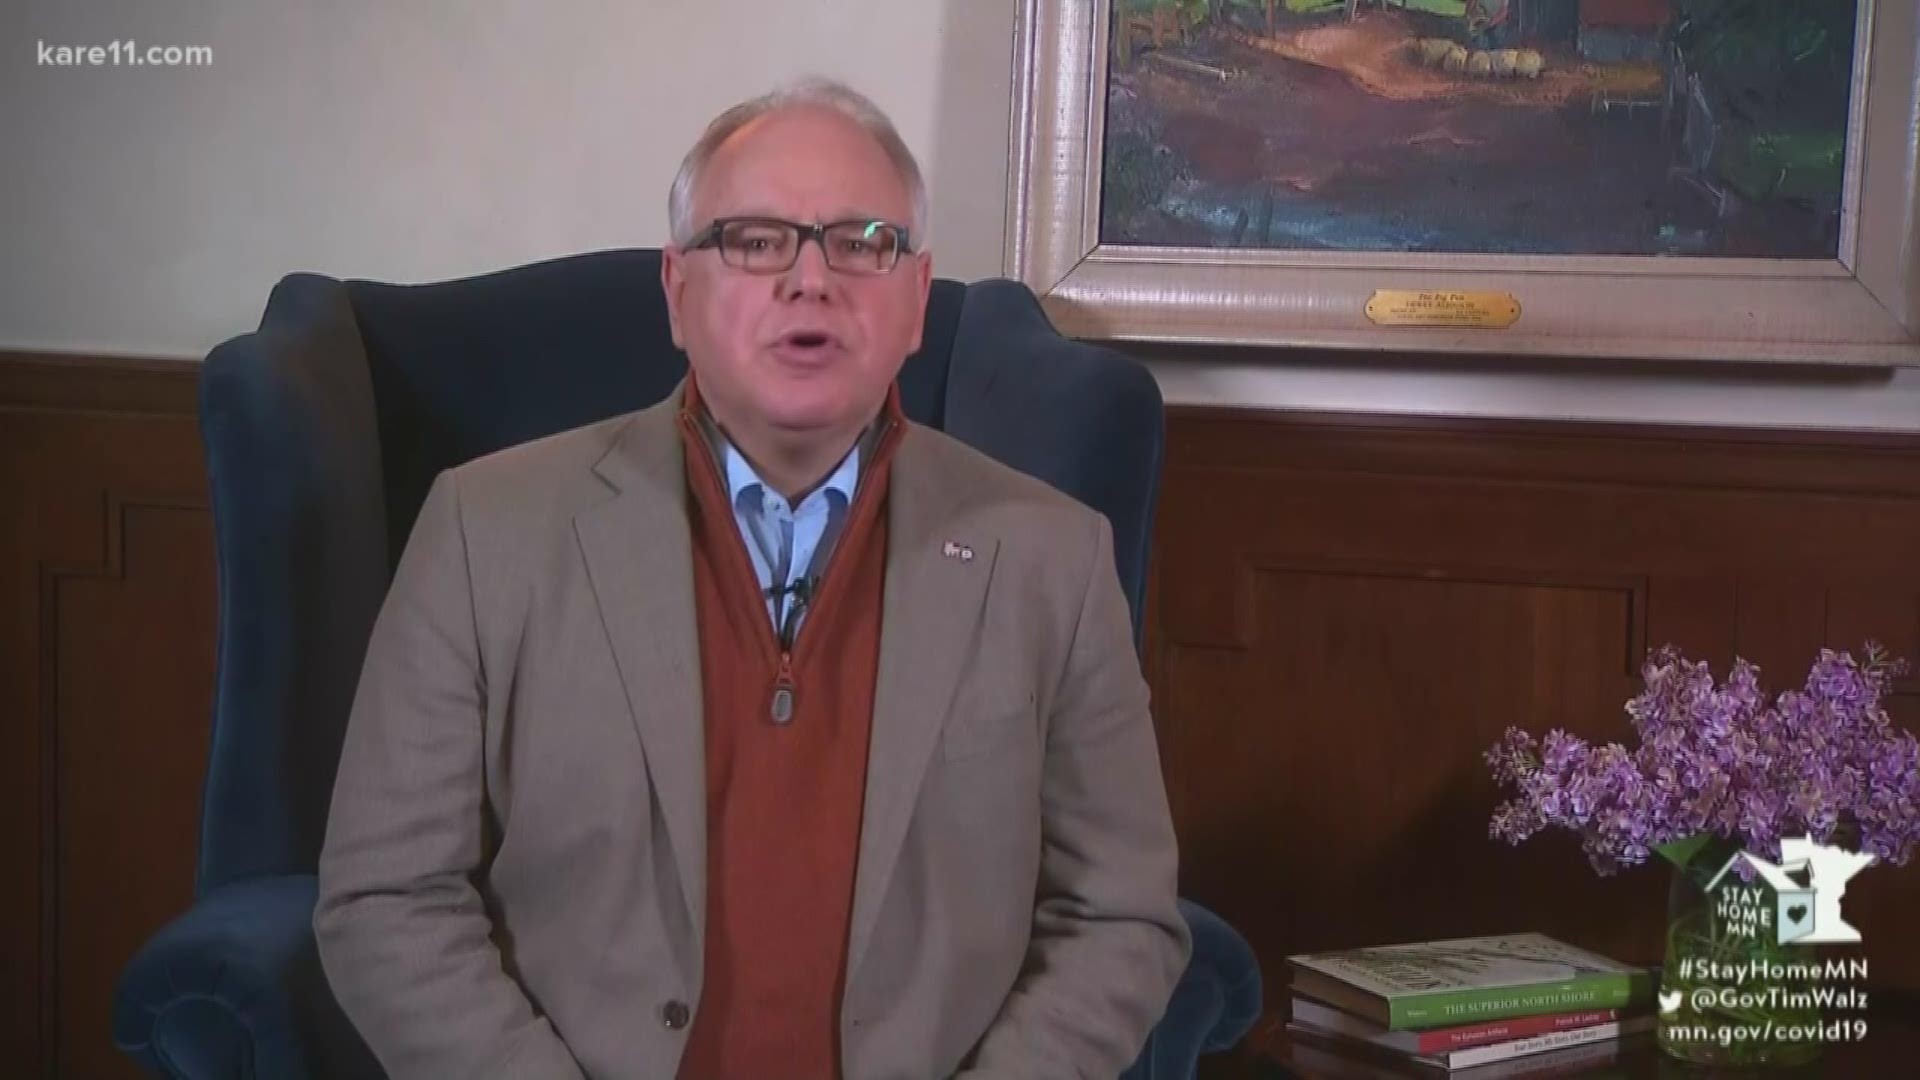 Governor Tim Walz delivered his second State of the State address from the governor’s residence Sunday evening.